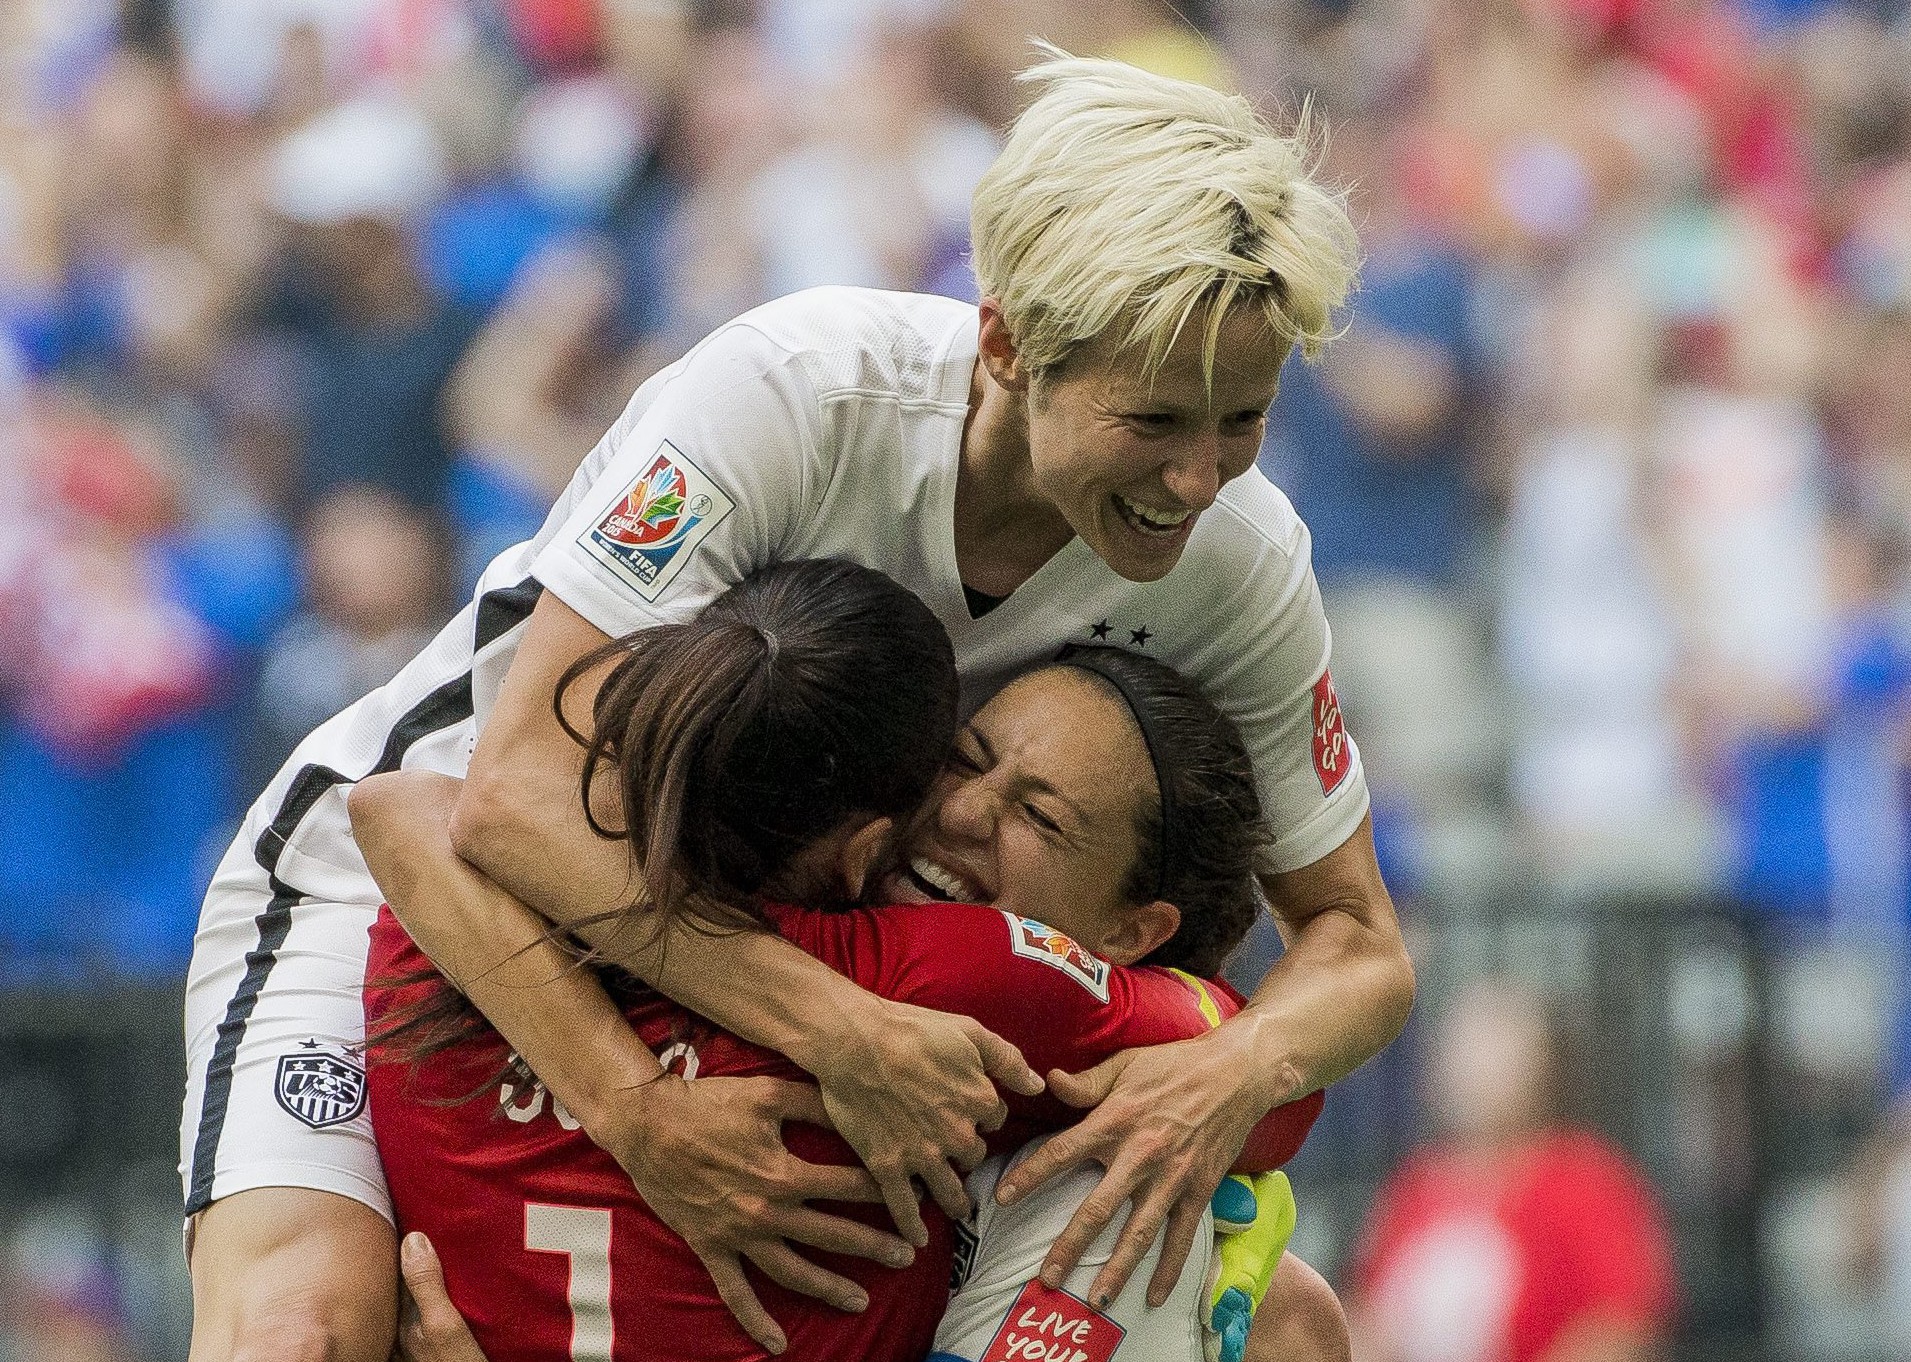 epa04833035 Carli Lloyd of the United States (10) celebrates her third goal of the first half with goalkeeper Hope Solo and Megan Rapinoe of the United States (top) during the FIFA Women's World Cup 2015 Final match between USA and Japan in Vancouver, Canada, 05 July 2015.  EPA/Bob Frid EDITORIAL USE ONLE, NOT USED IN ASSOCATION WITH ANY COMMERCUIAL ENTITY - IMAGES MUST NOT BE USED IN ANY FORM OF ALERT OR PUSH SERVICE OF ANY KIND INCLUDING VIA MOBILE ALERT SERVICES, DOWNLOADS TO MOBILE DEVICES OR MMS MESSAGING